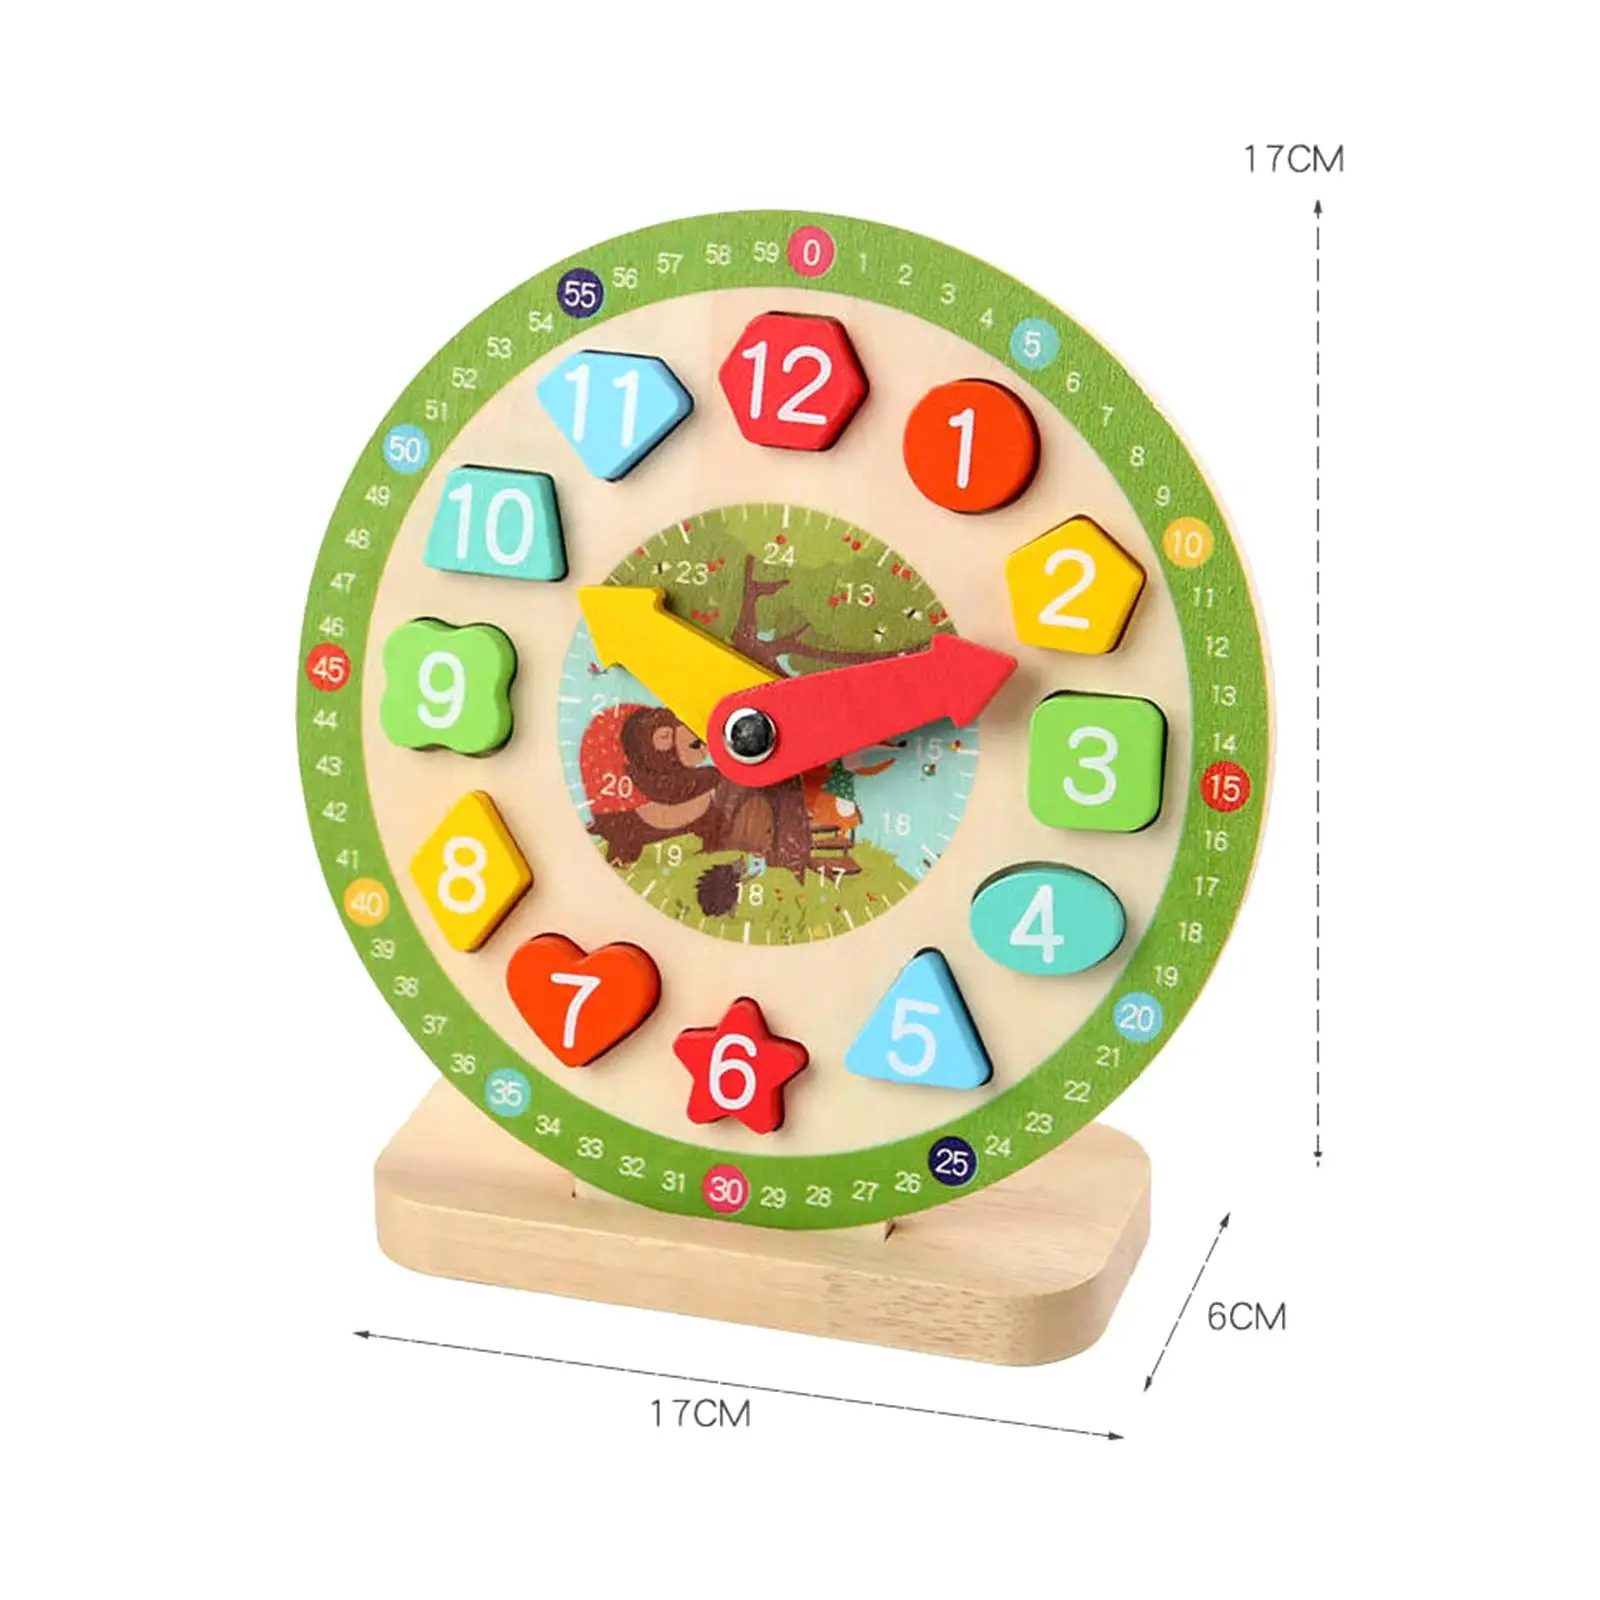 Wooden Clock Kids Toy Montessori Toy Time Learning Teaching Aid for Playroom Clocks Practice Learning Activities Baby Children